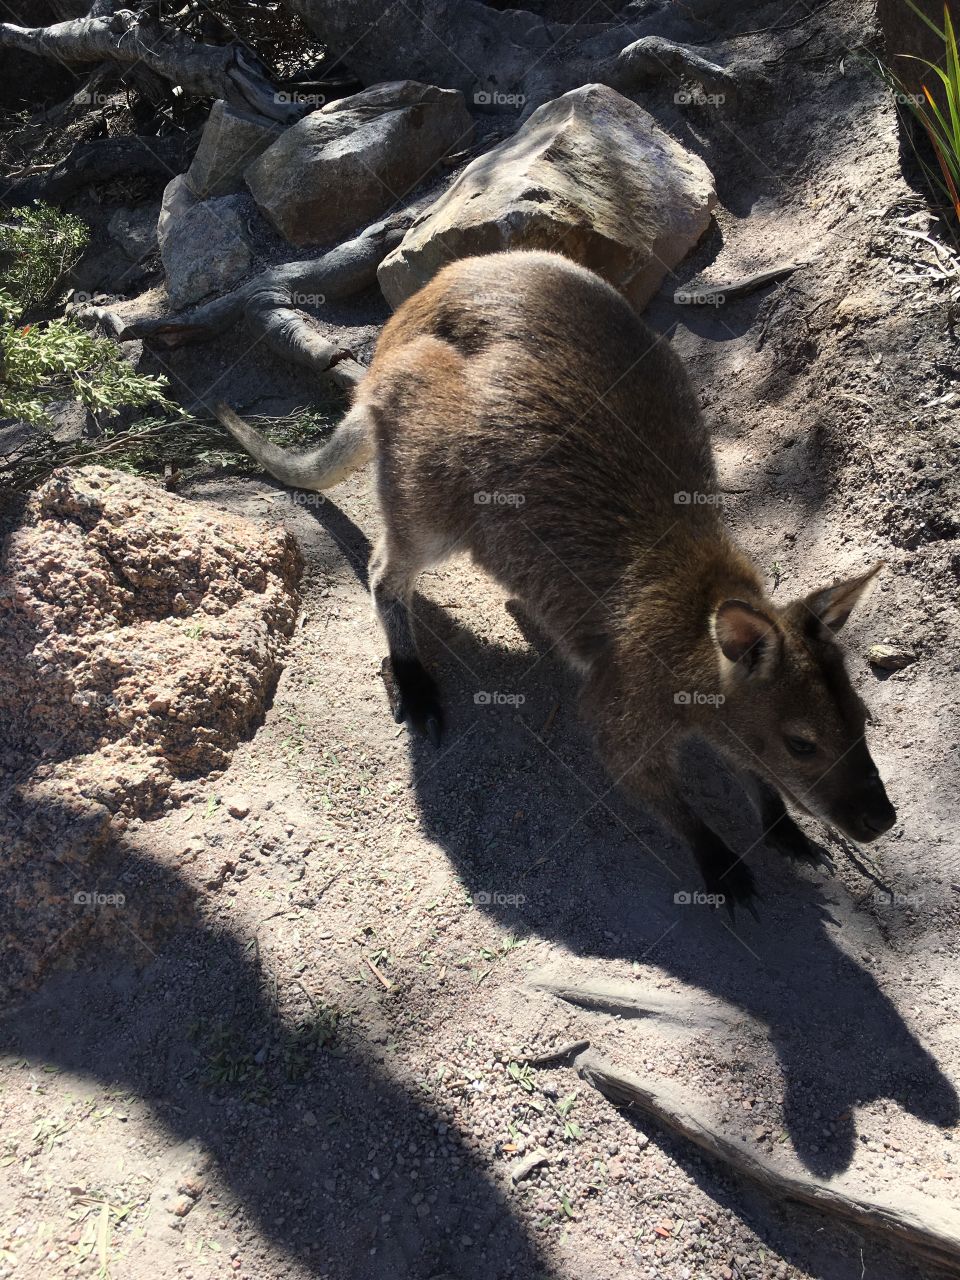 Wallaby on the rocks